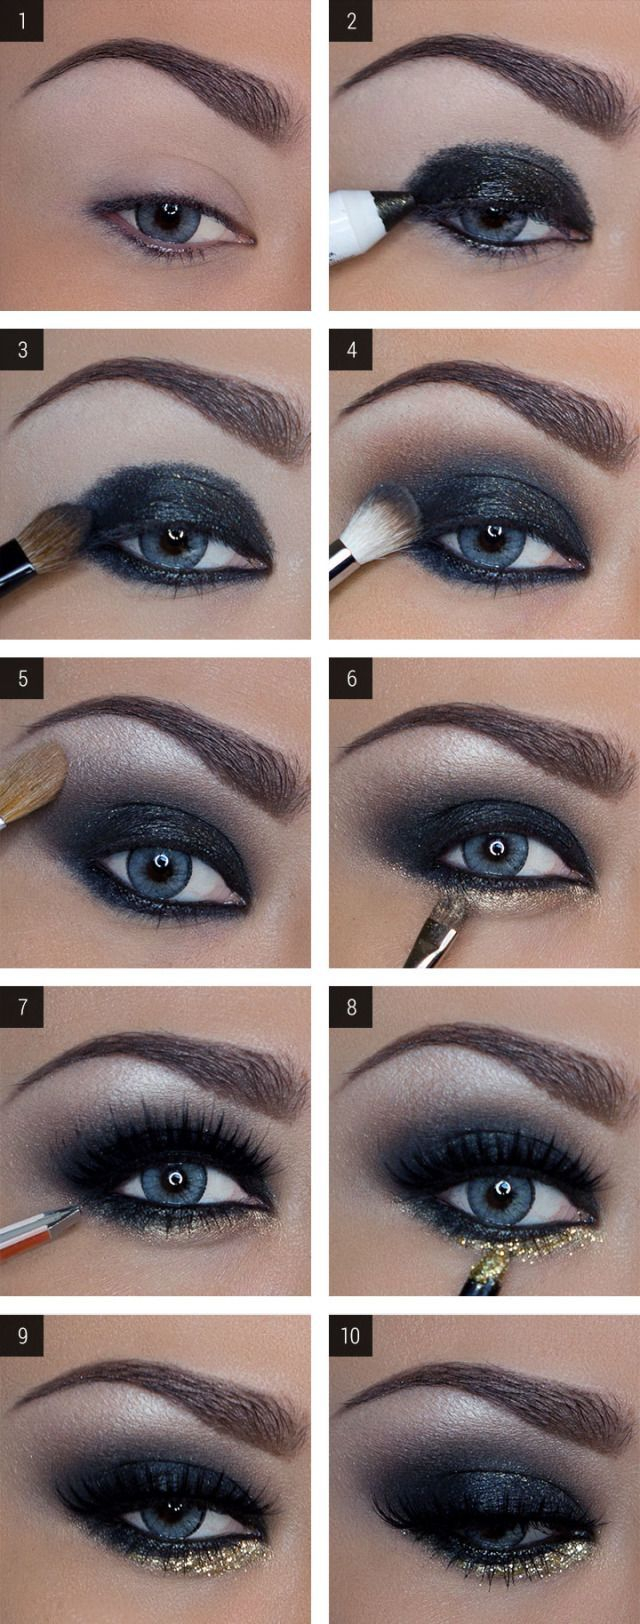 Eye Makeup For Dark Skin Tone Simple Party Makeup Tips For Black Women To Look Gorgeous